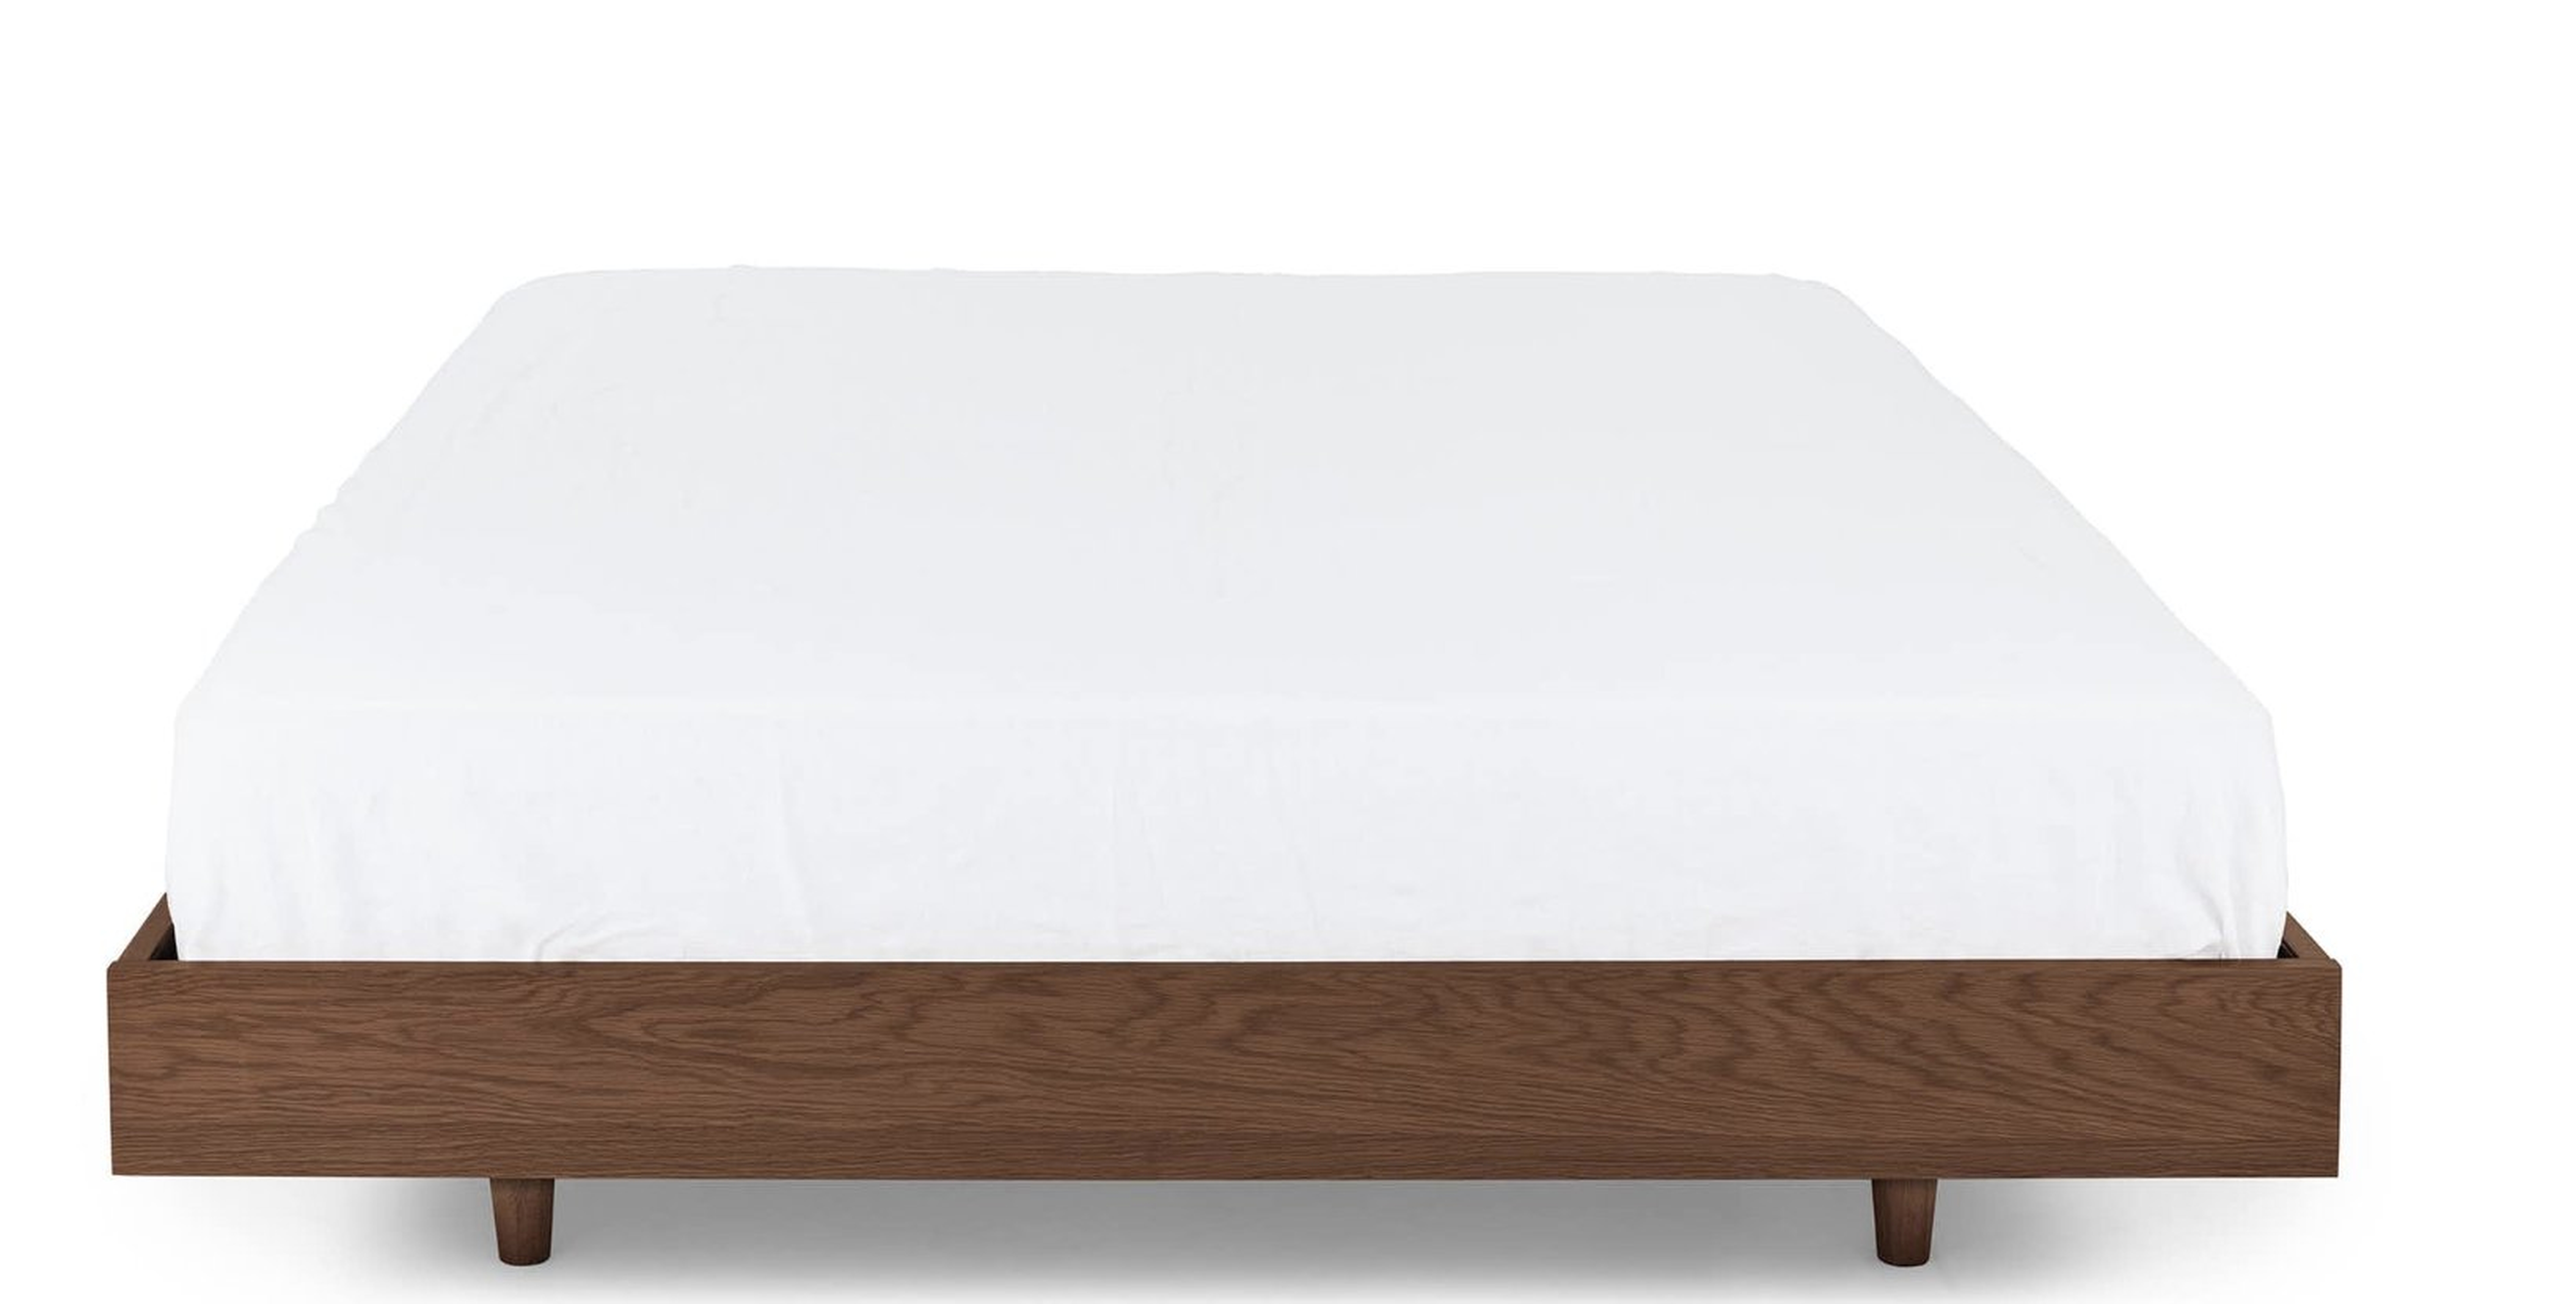 Basi Walnut Queen Bed Frame - Article